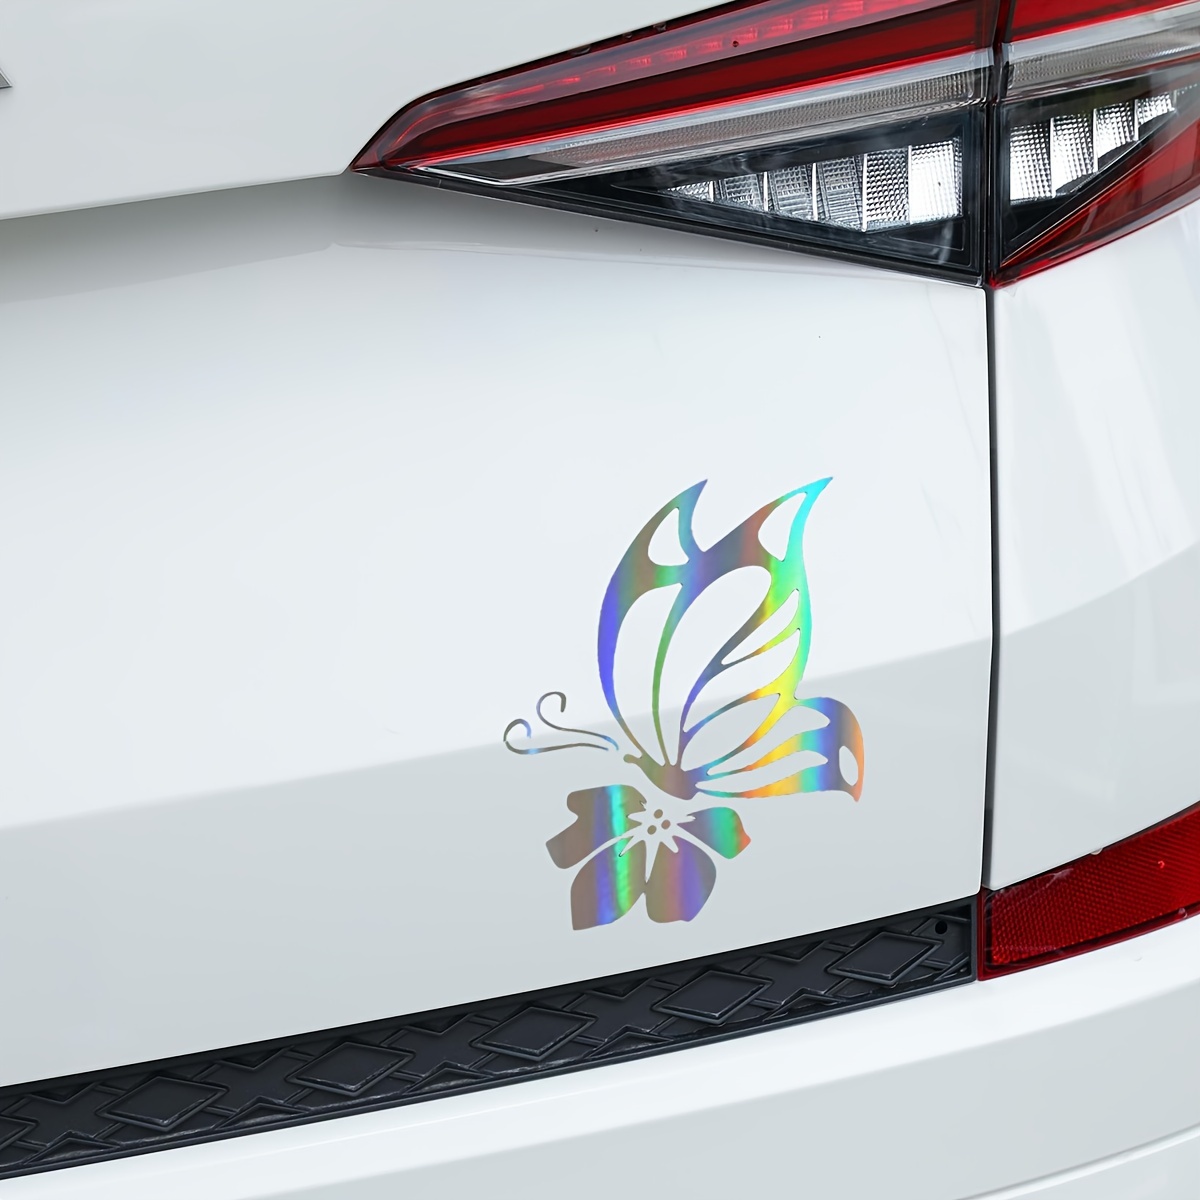 Butterfly Car Decal 03